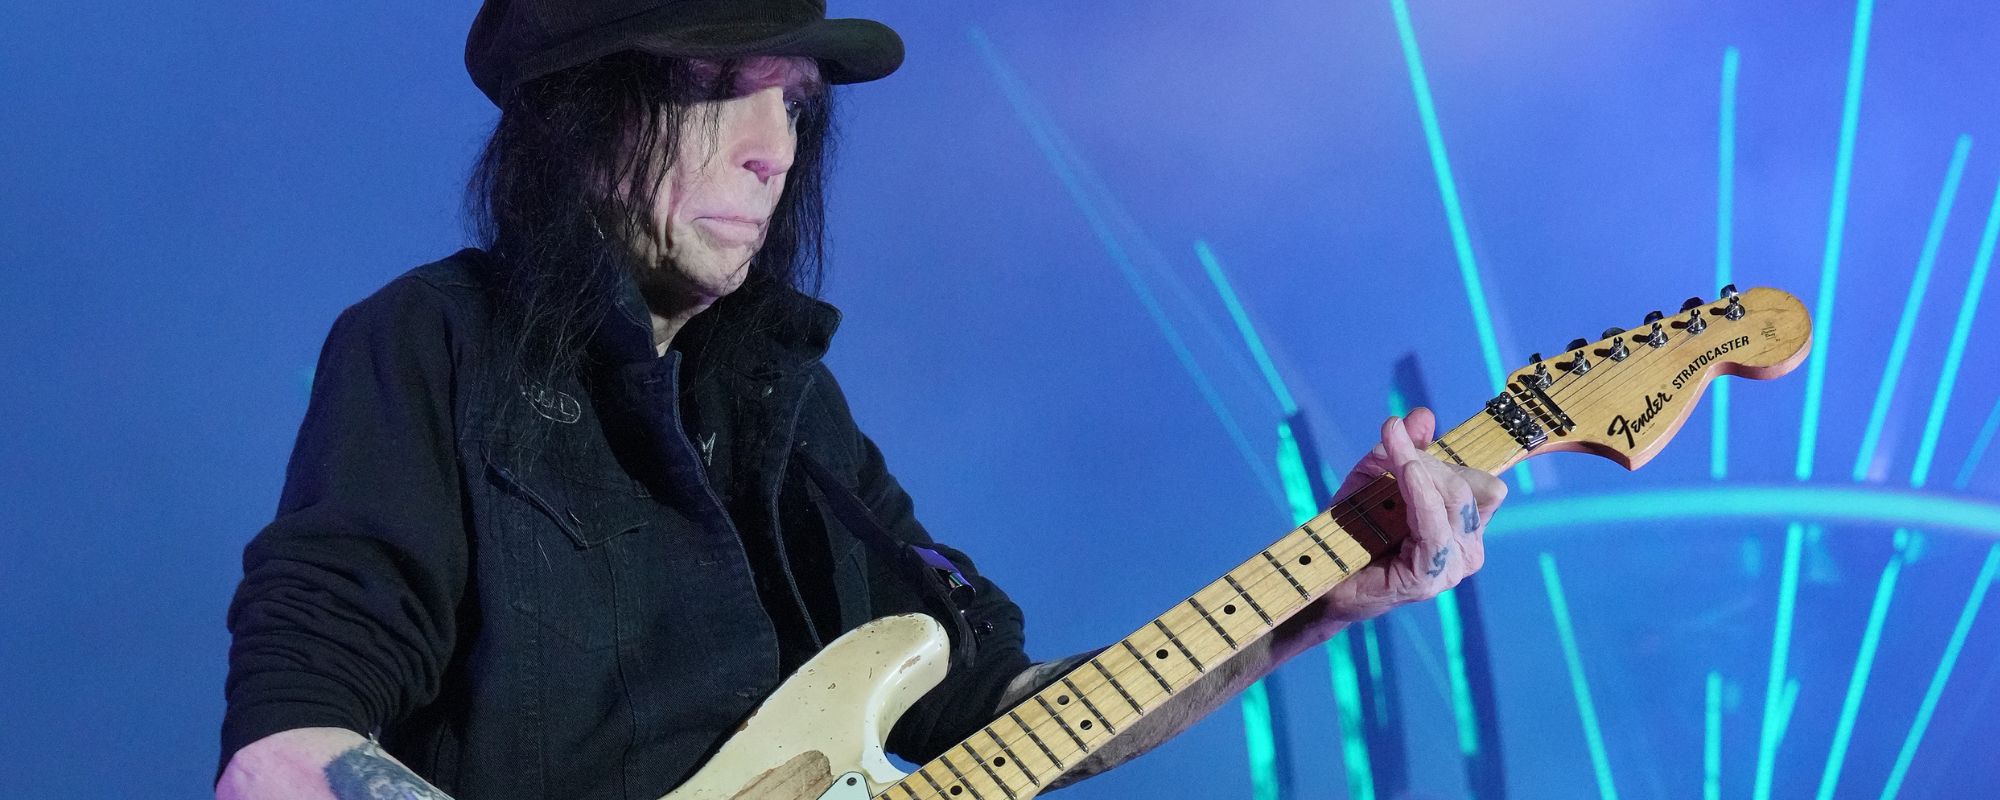 Mick Mars Speaks Out on Mötley Crüe’s Choice to ‘Fire’ Him